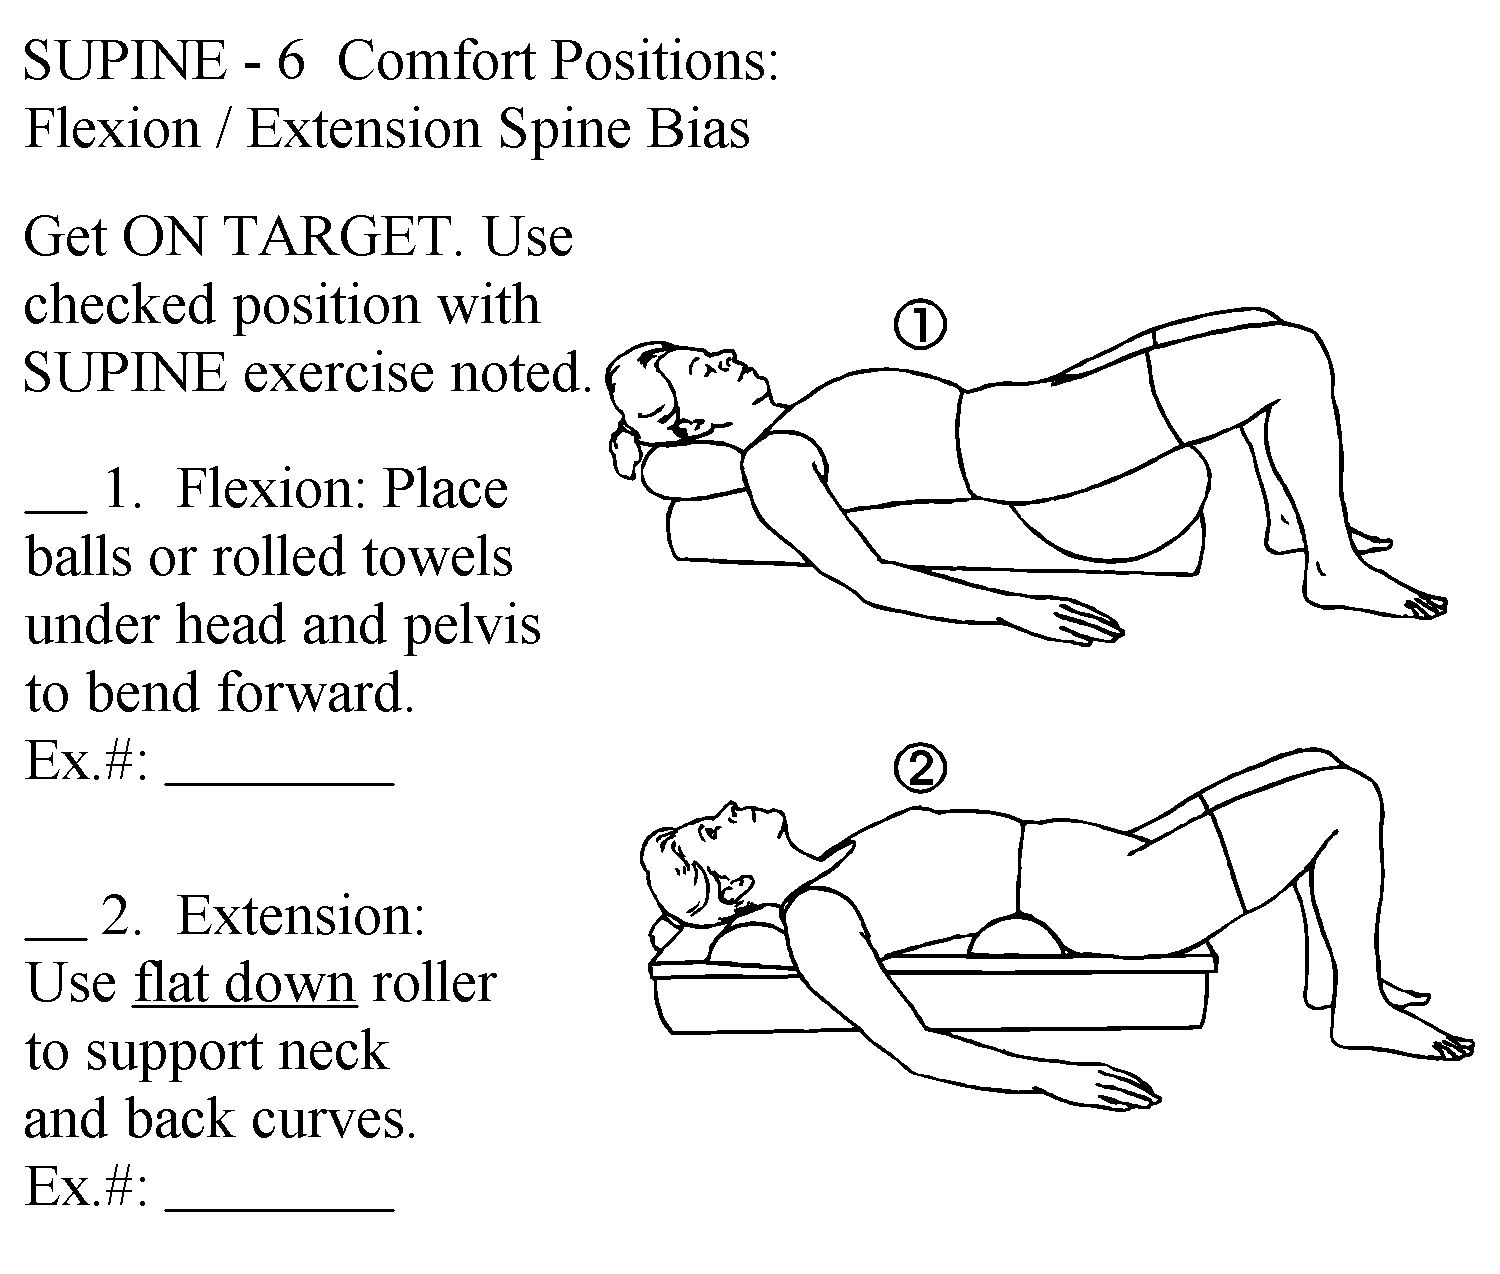 Woman lying on back, knees bent, using a pillow under hips and under low back to position in ease either lumbar flexion or extension